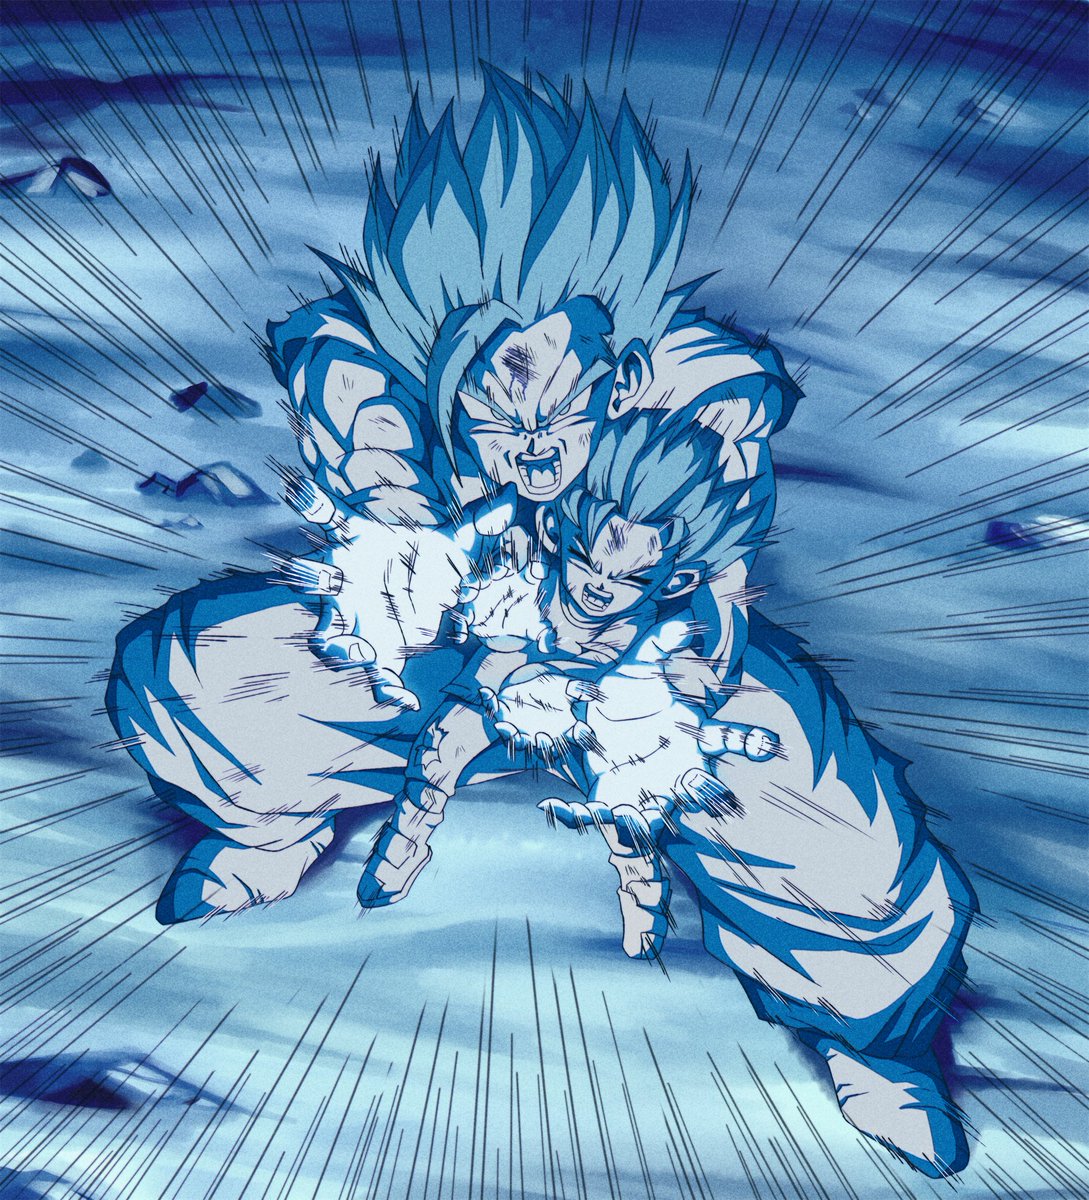 「Here's a Gohan/Pan kamehameha. I was hop」|Disのイラスト